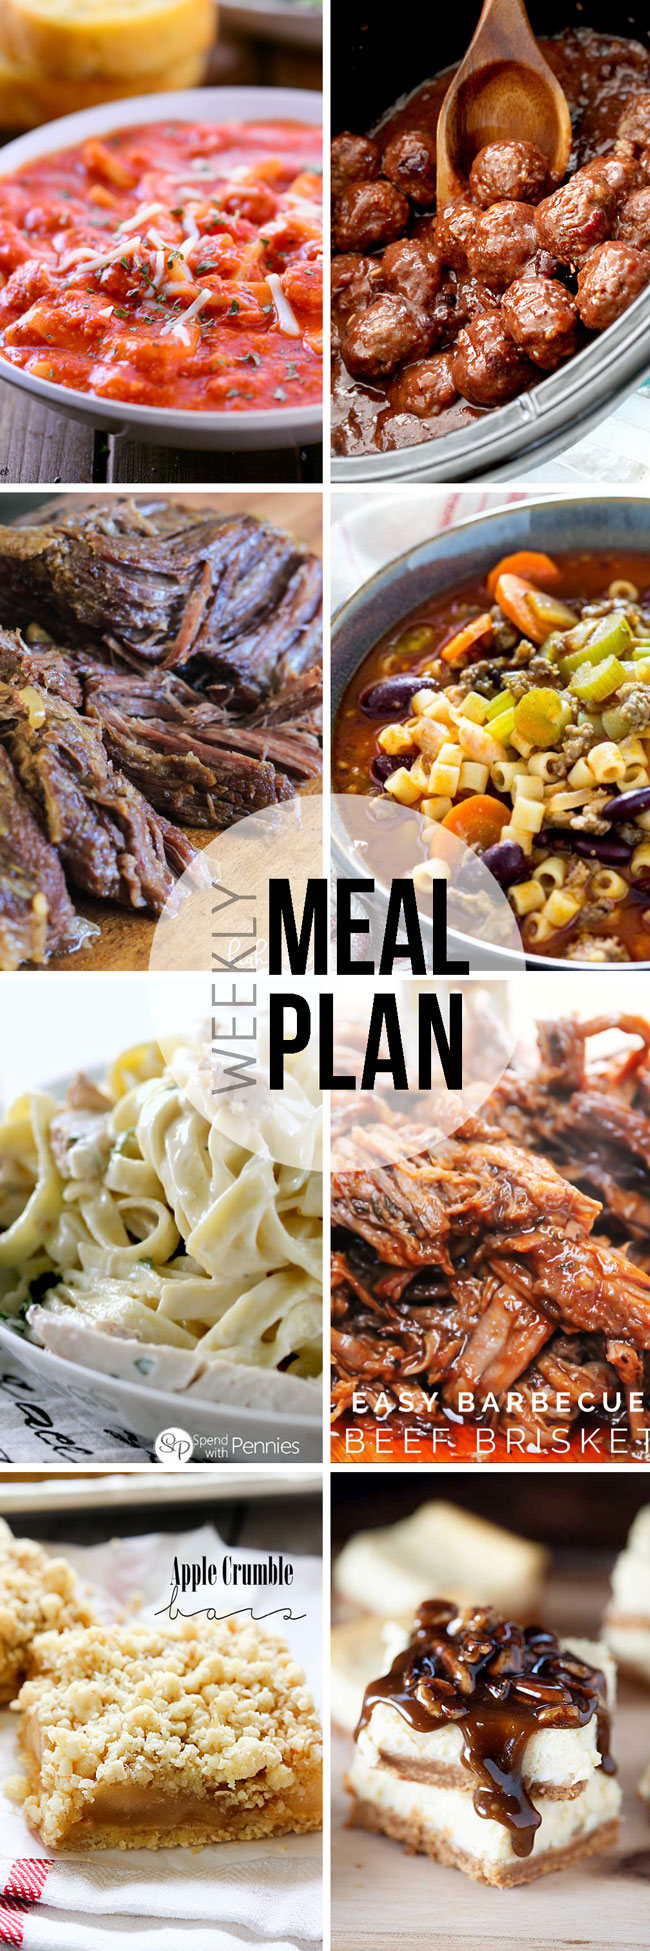 An amazing meal plan with great recipes to make life easier. 